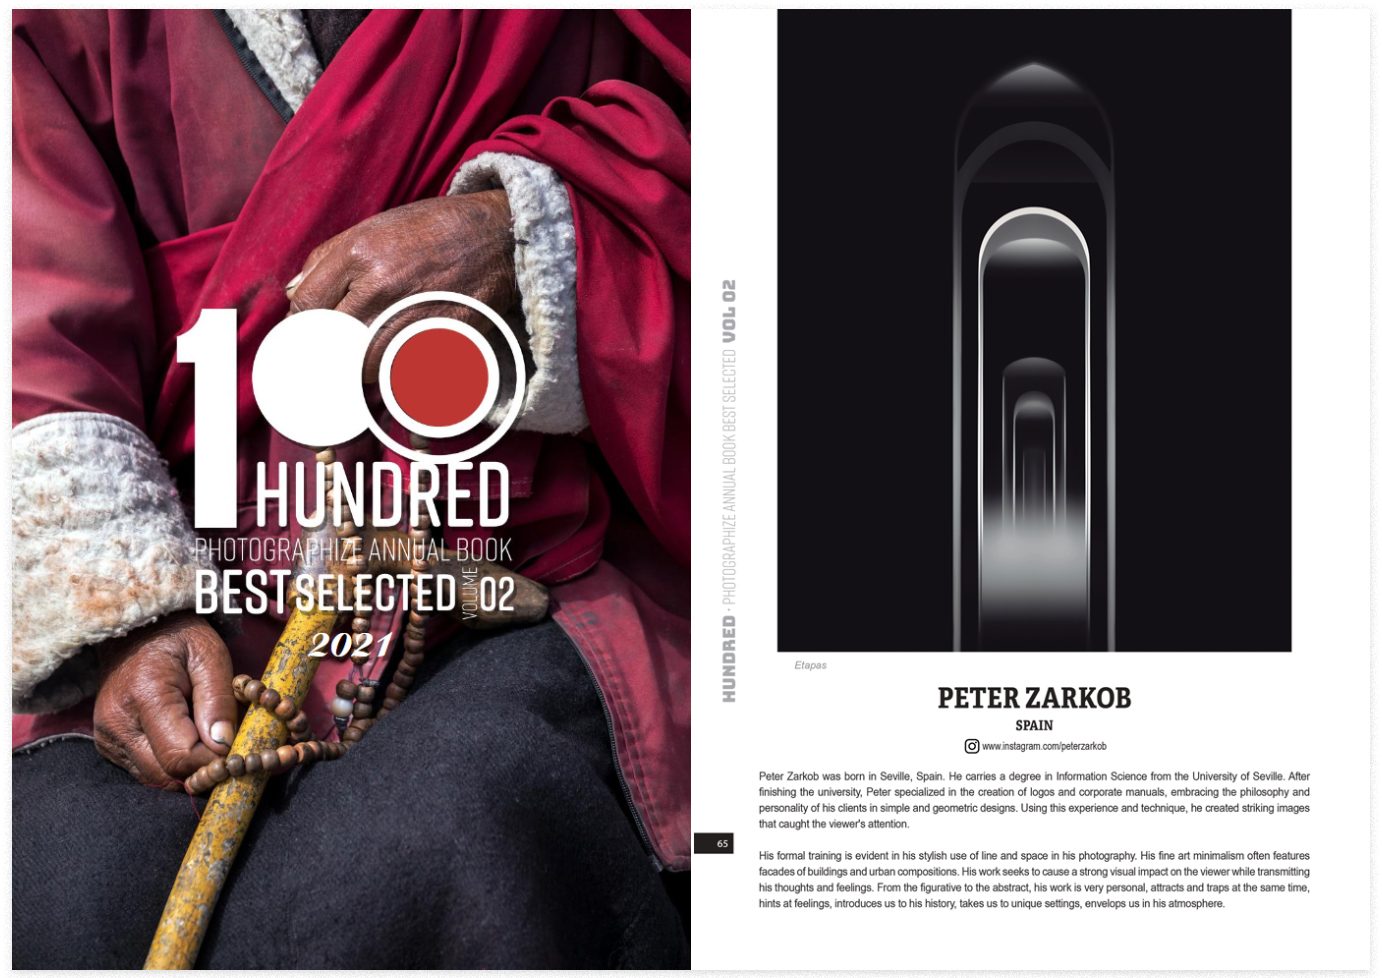 [Hundred] Photographize Annual Book Best Selected